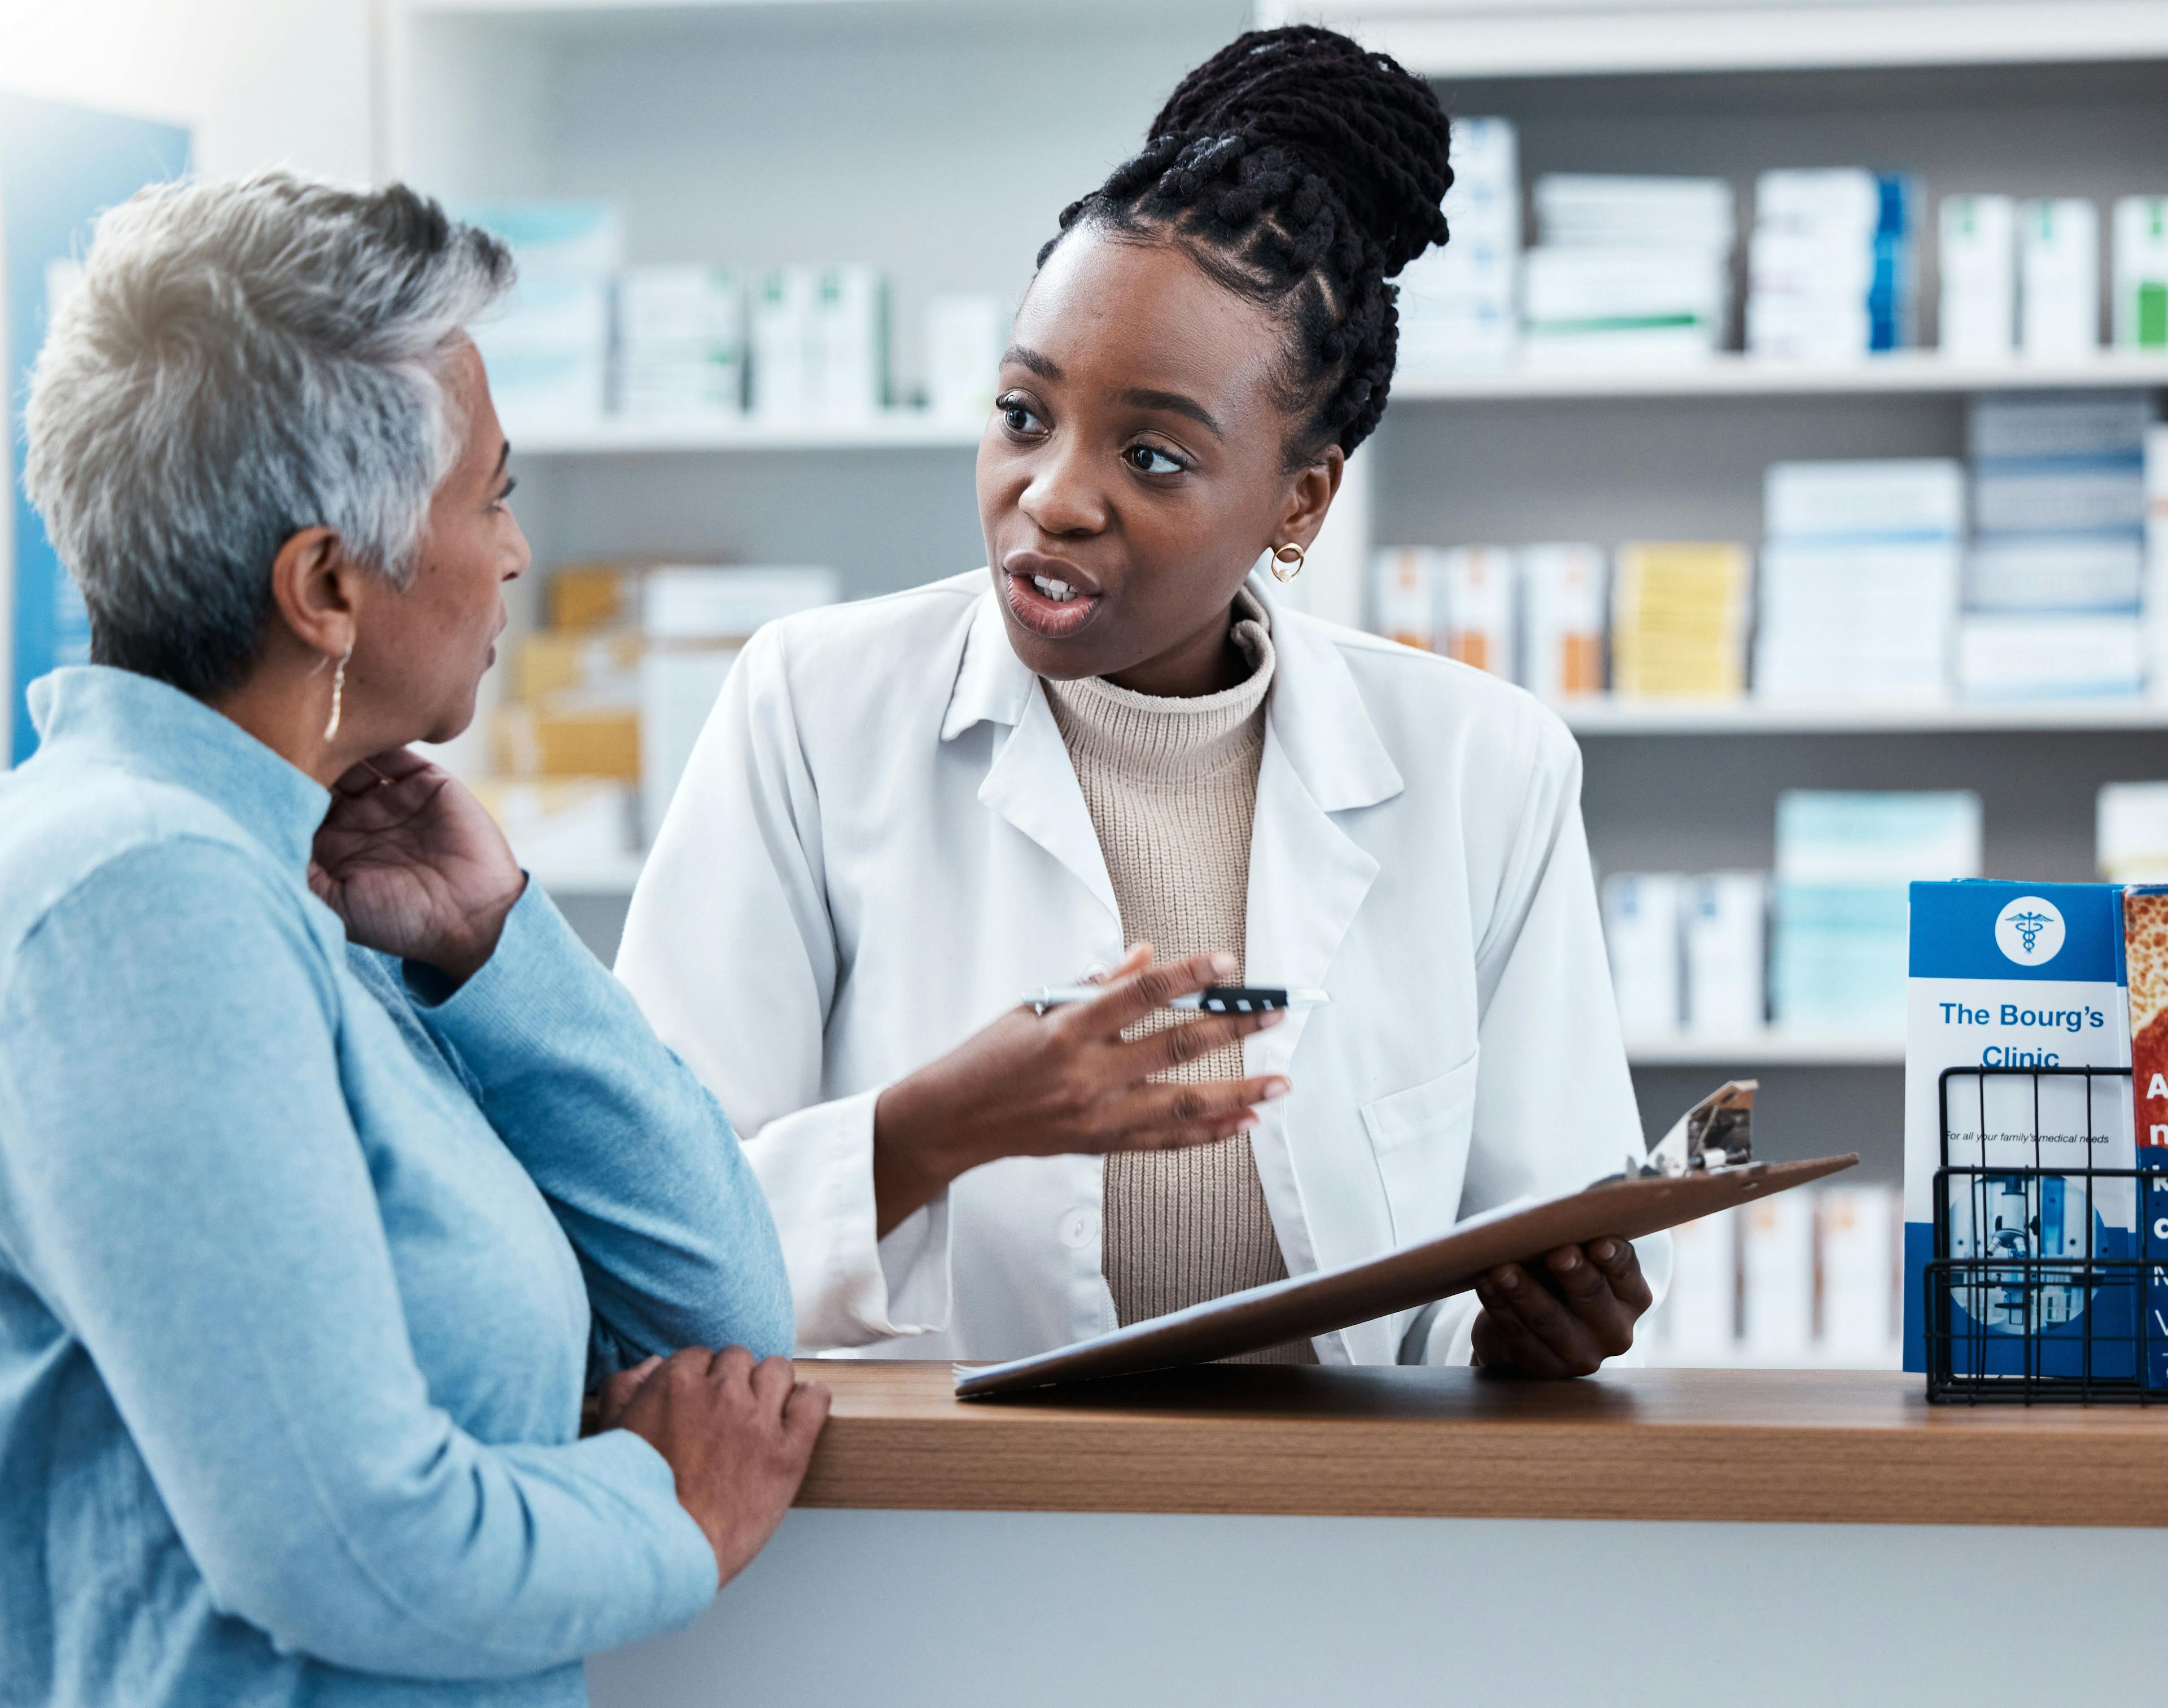 Pharmacist helping a patient in a pharmacy | Image Credit: Malik E/peopleimages.com - stock.adobe.com